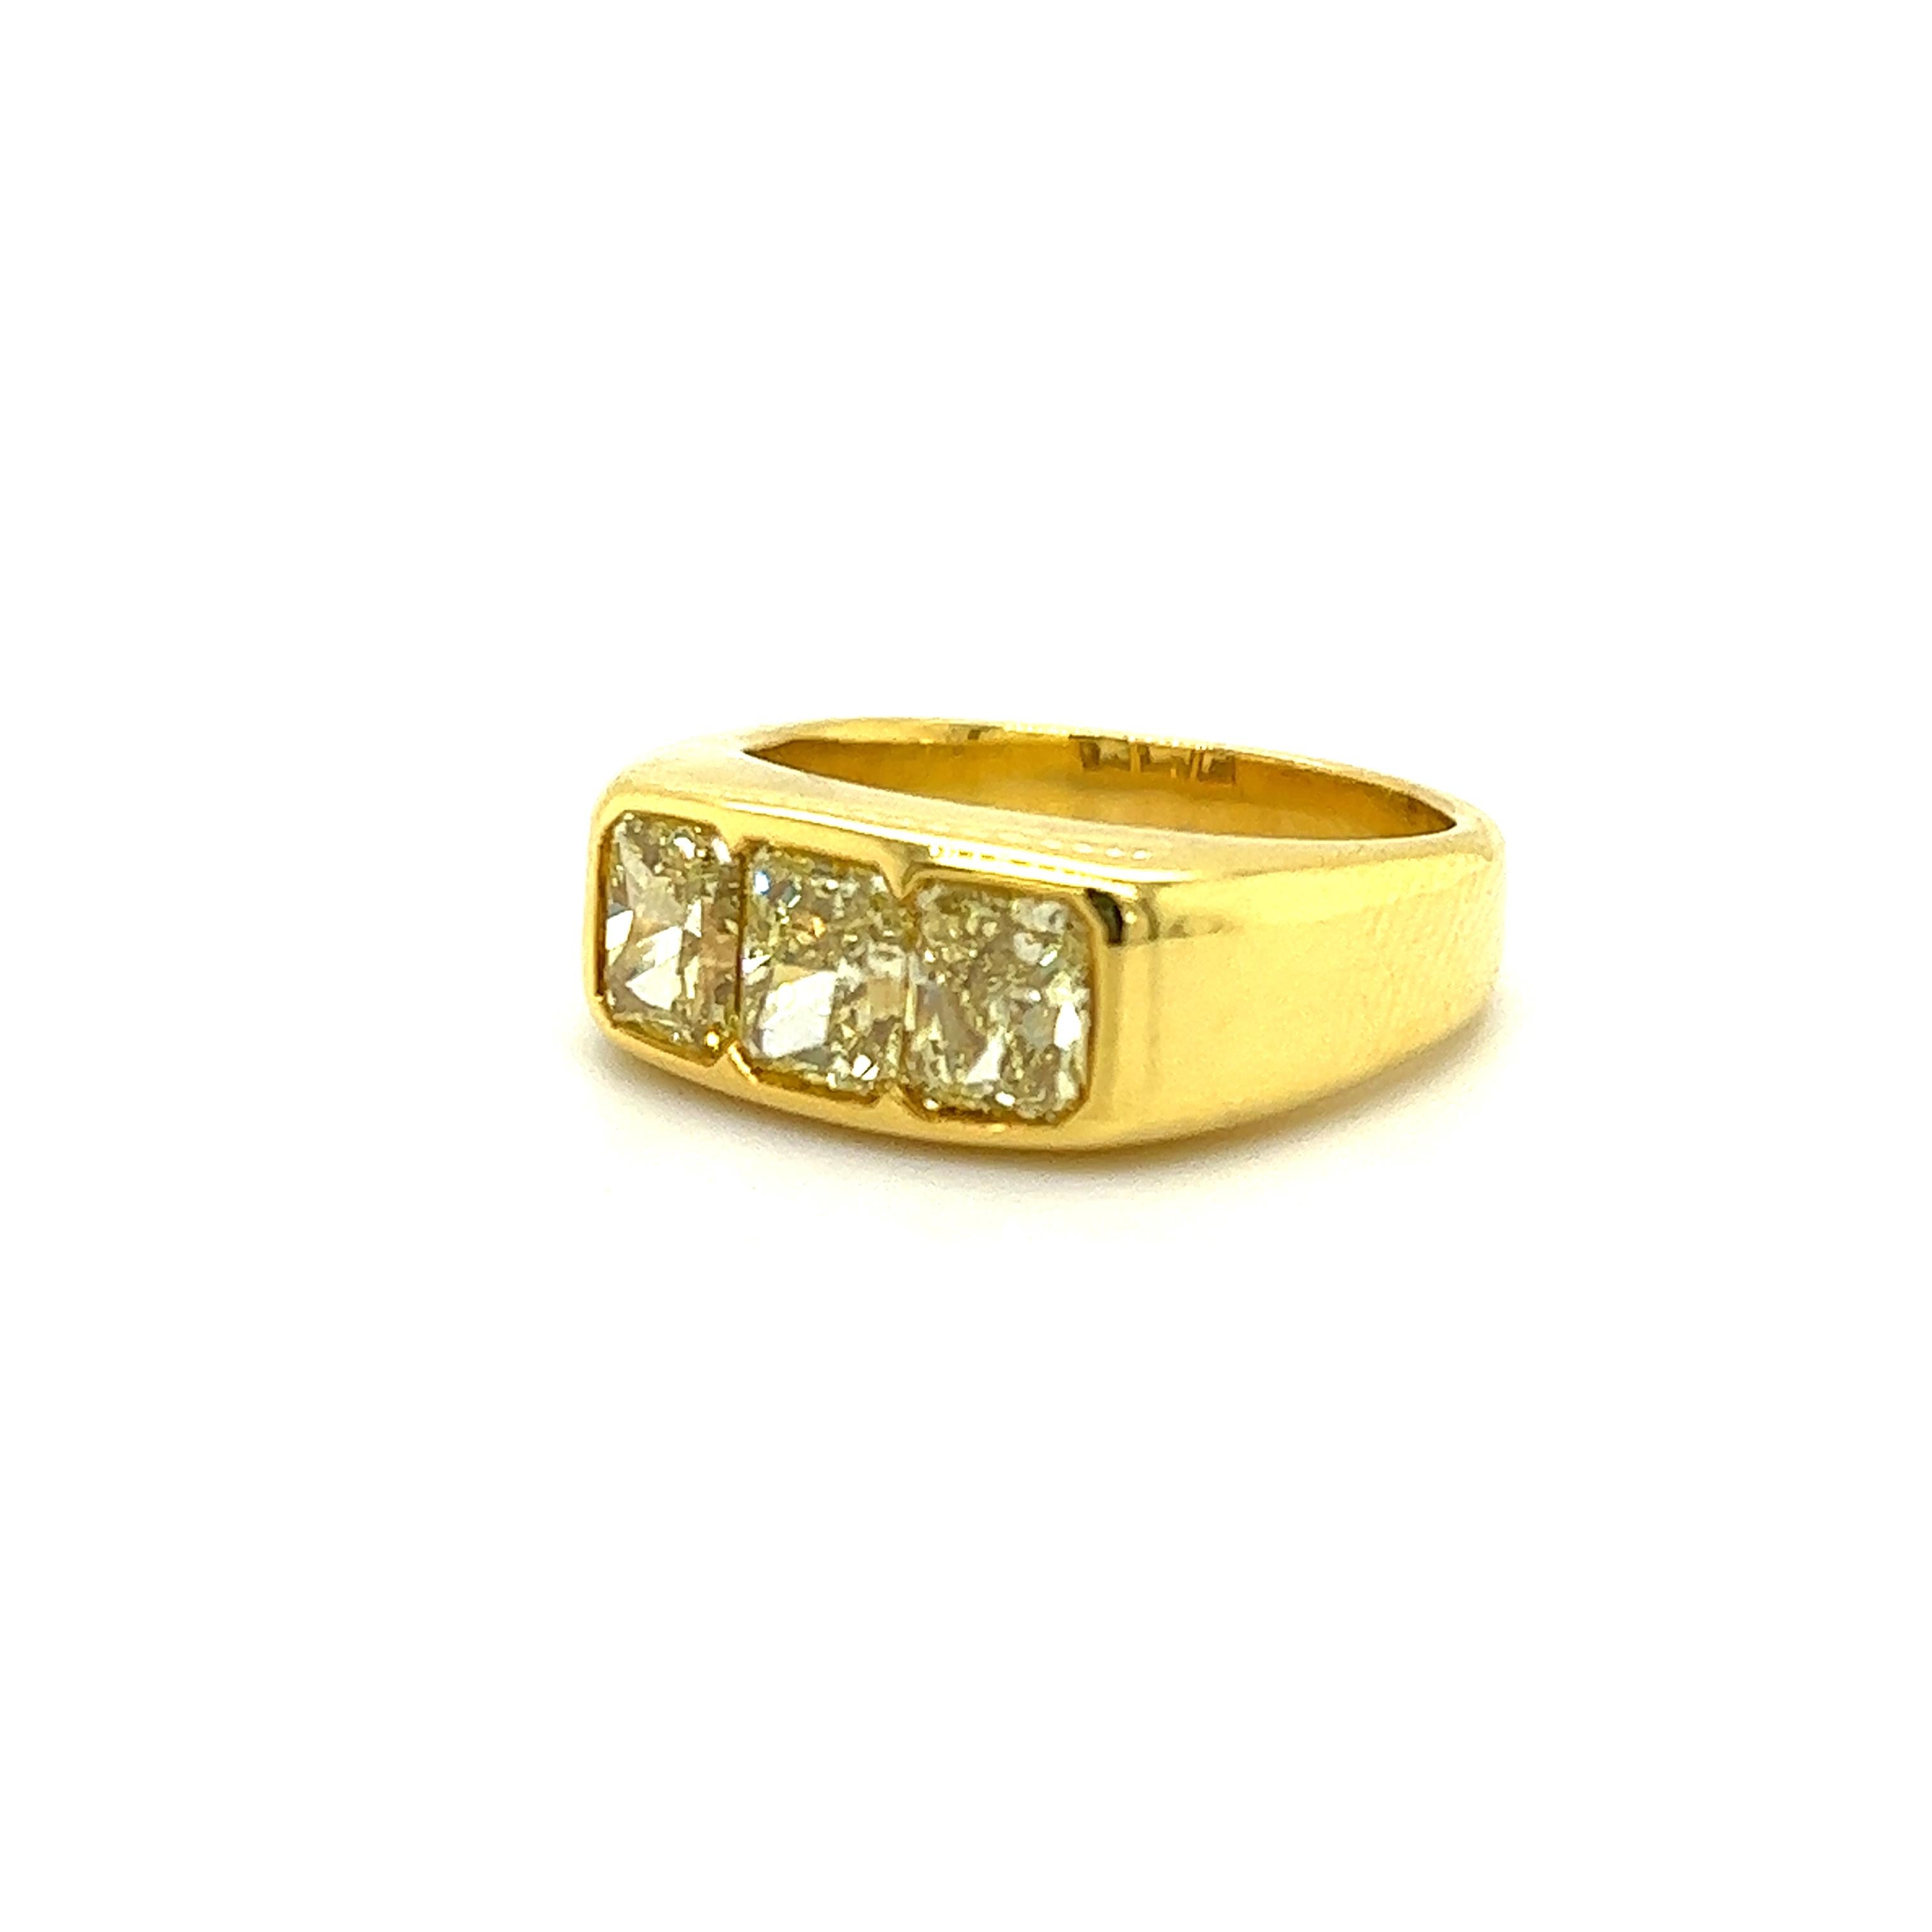 Exceptional ring crafted in 18 yellow gold. The ring highlights three fancy yellow colored earth mined natural diamonds. The diamonds are radiant cut and show a vibrant yellow color. Each diamond weighs 1.00 carat and are matched perfectly. The ring